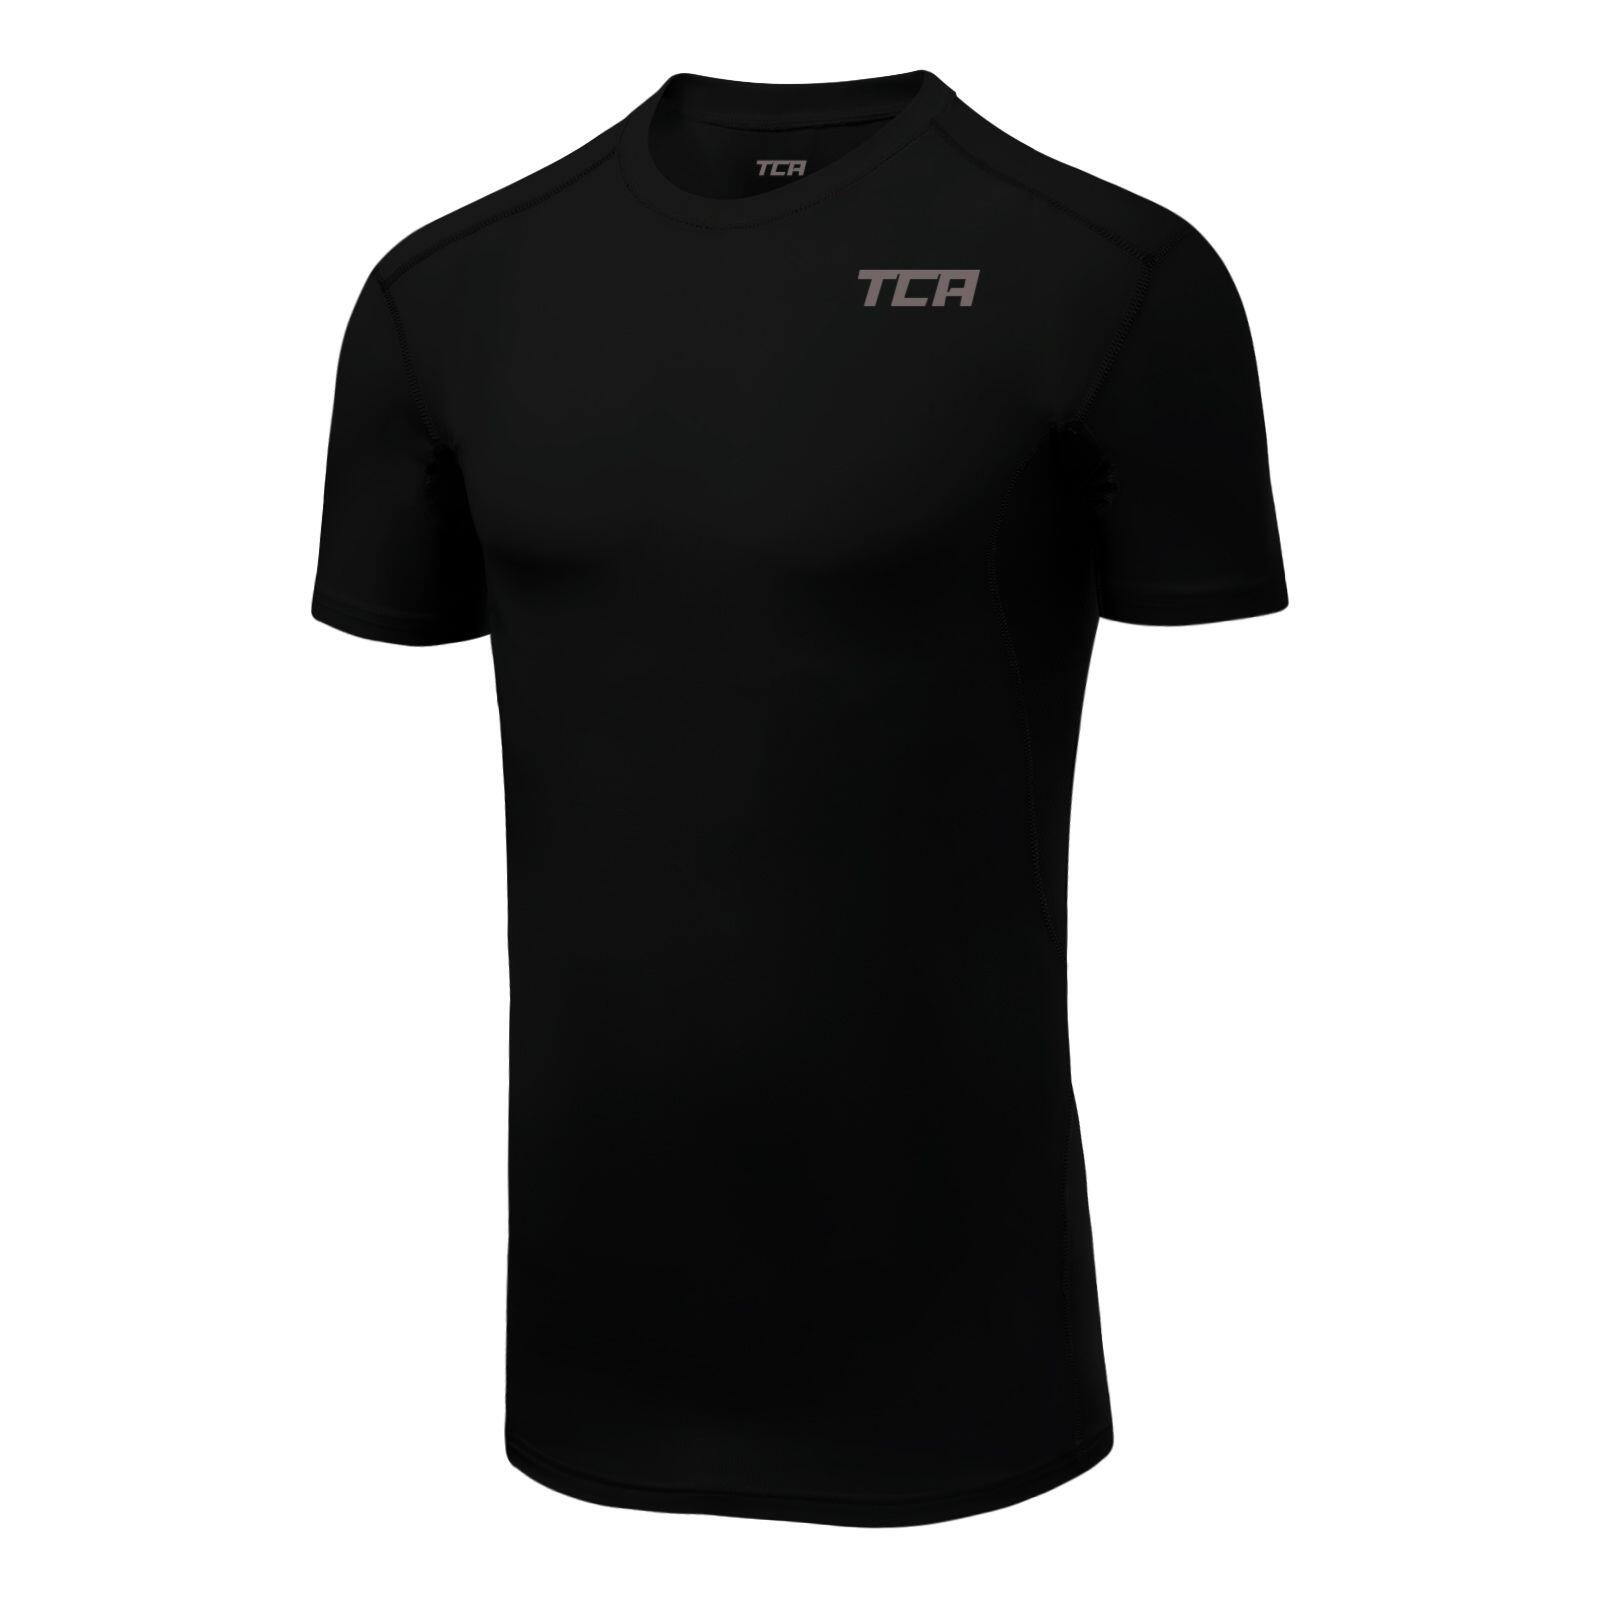 TCA Boys' HyperFusion Breathable Base Layer Compression T-shirt - Black